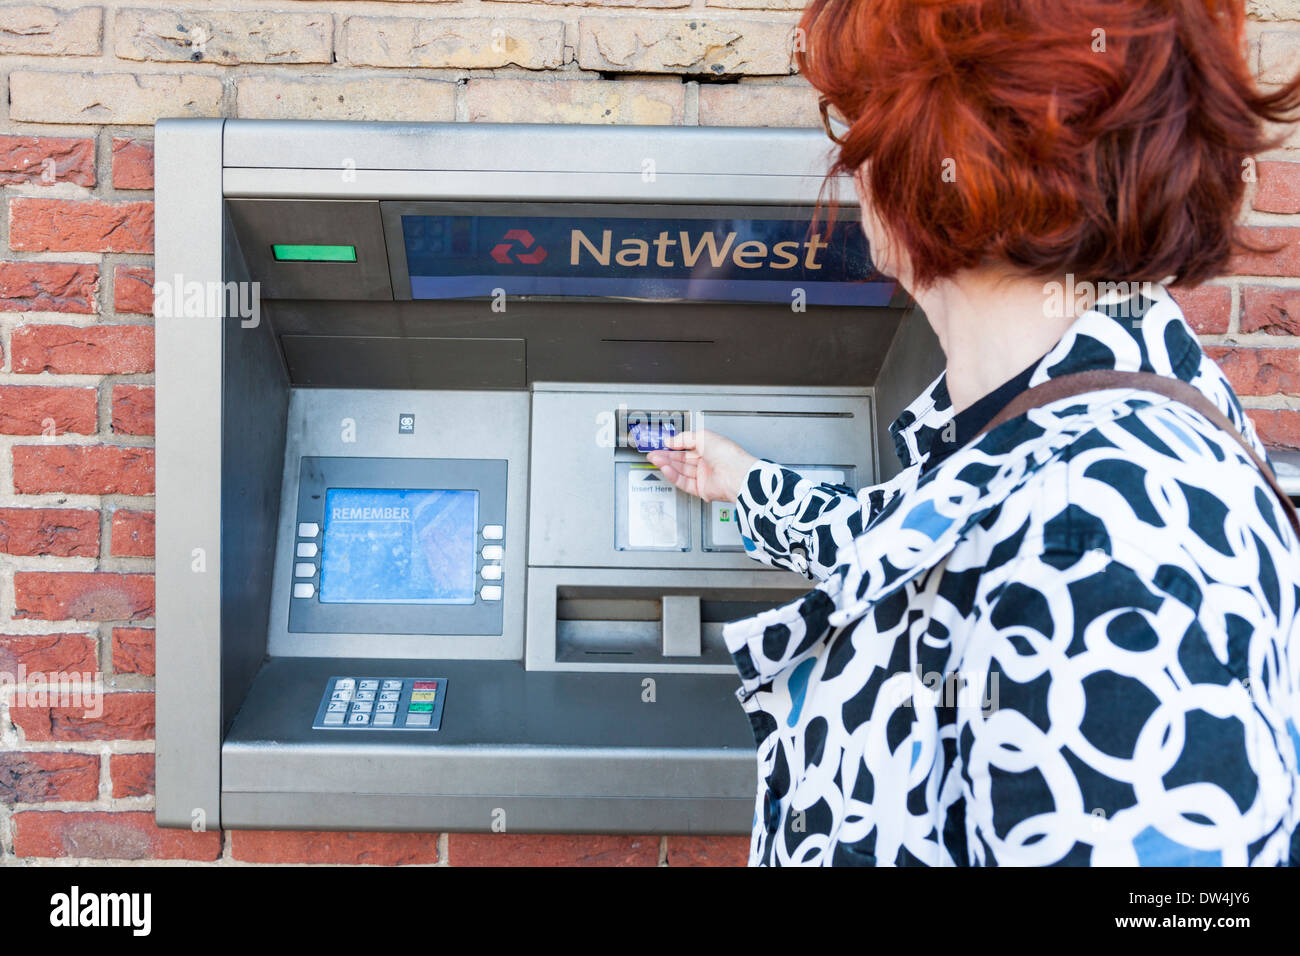 Woman using an ATM cash machine at a NatWest bank, Nottinghamshire, England, UK Stock Photo